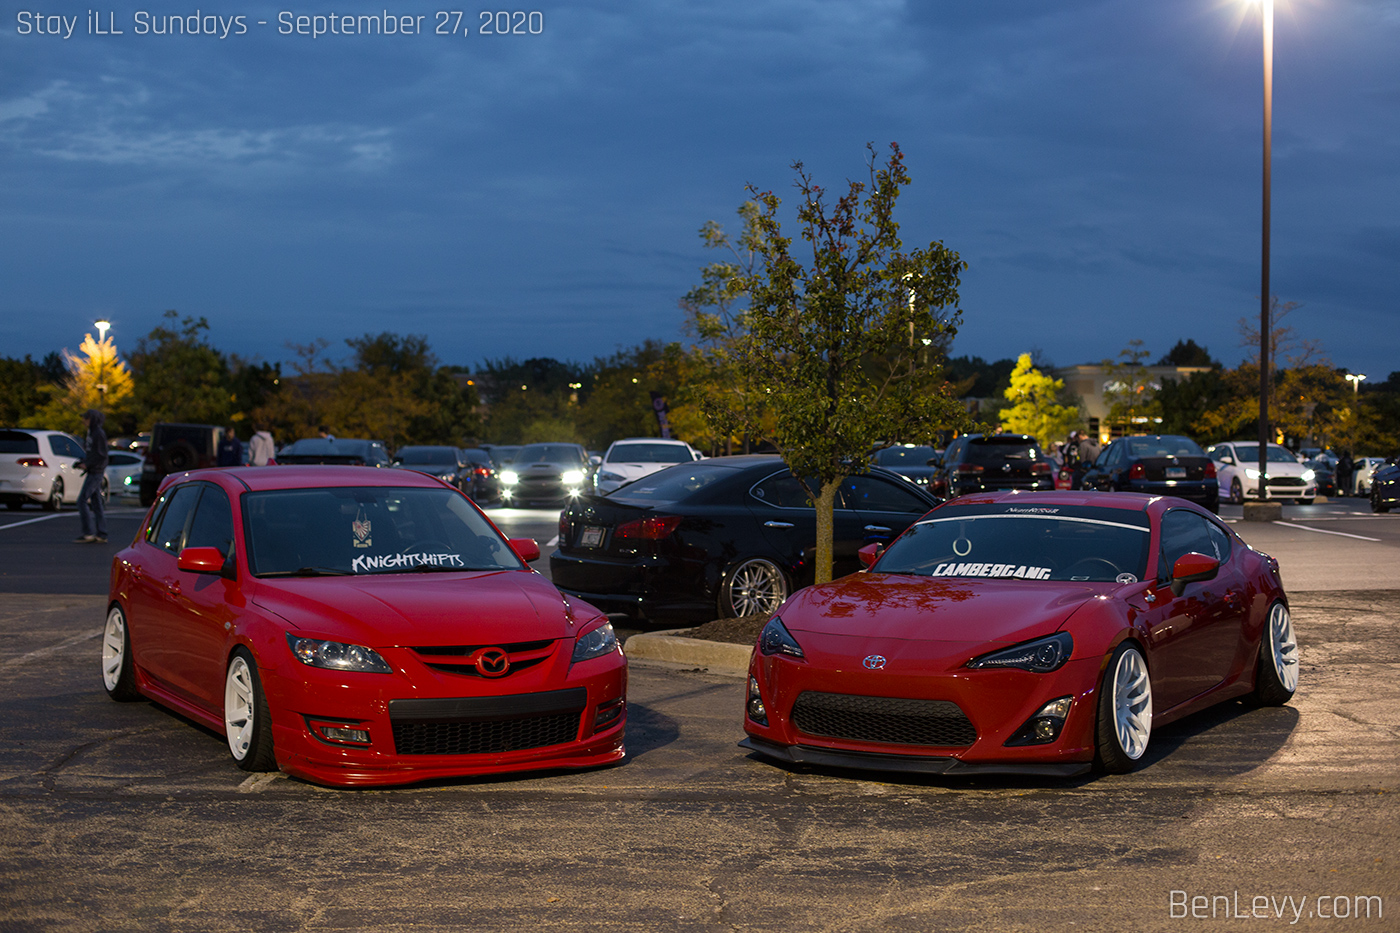 Red Mazdaspeed3 and FR-S